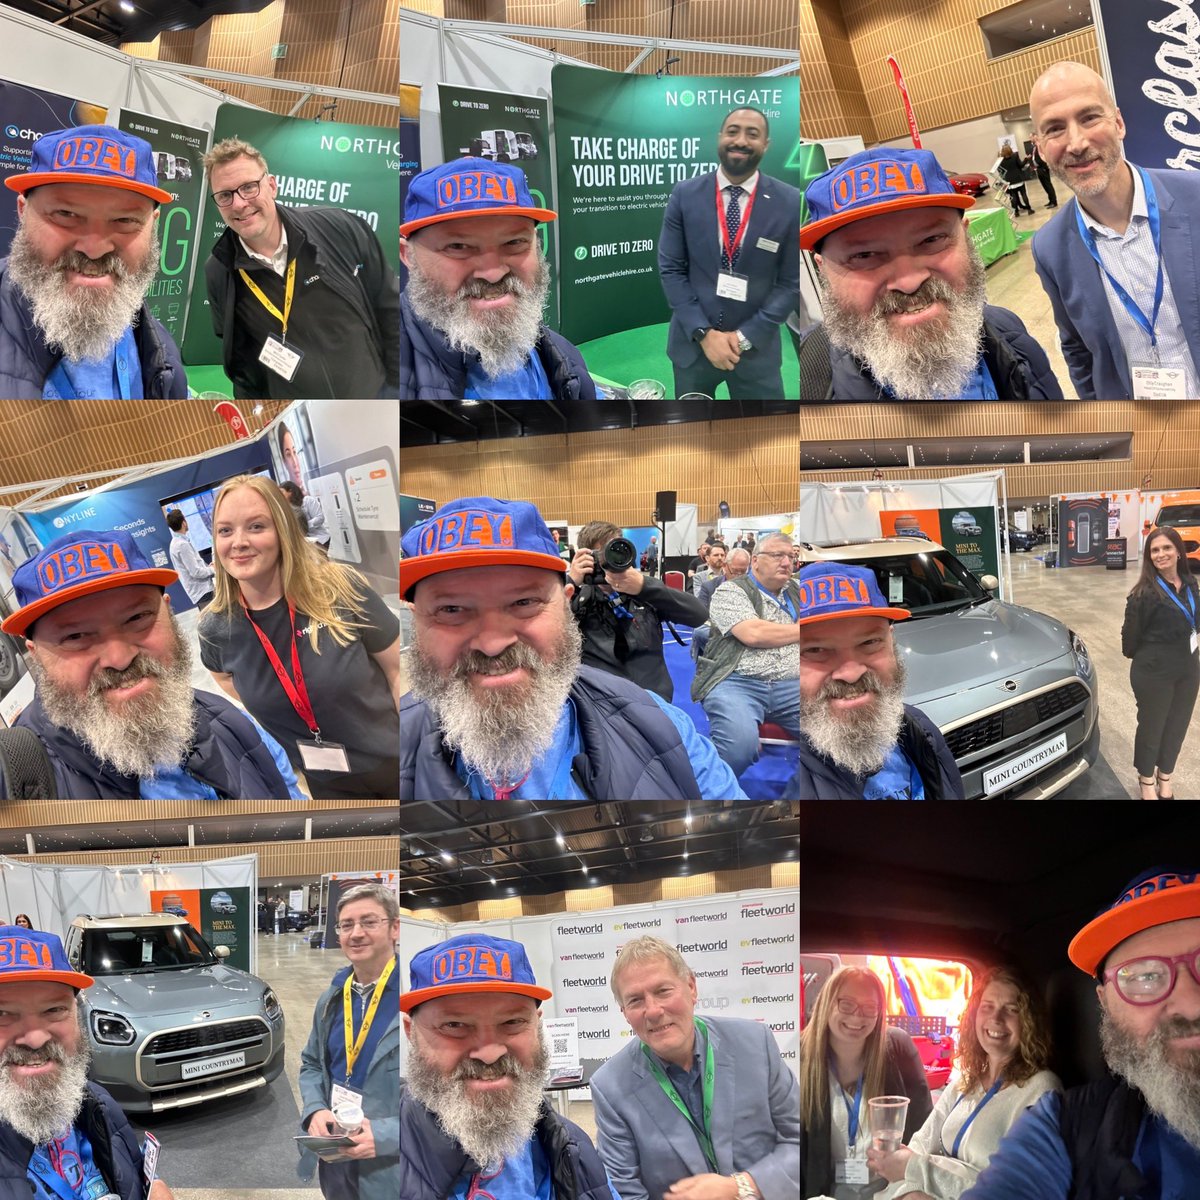 Finally todays #selfies great event at @MKDonsFC #stadiumMK - I left MK in 2004 , 20 years later it looks even more amazing @mkcouncil @mkfm thank you everyone for being so welcoming at @GBFleetEvent hope you all had an amazing awards dinner :) look out for my new channel #EV6000